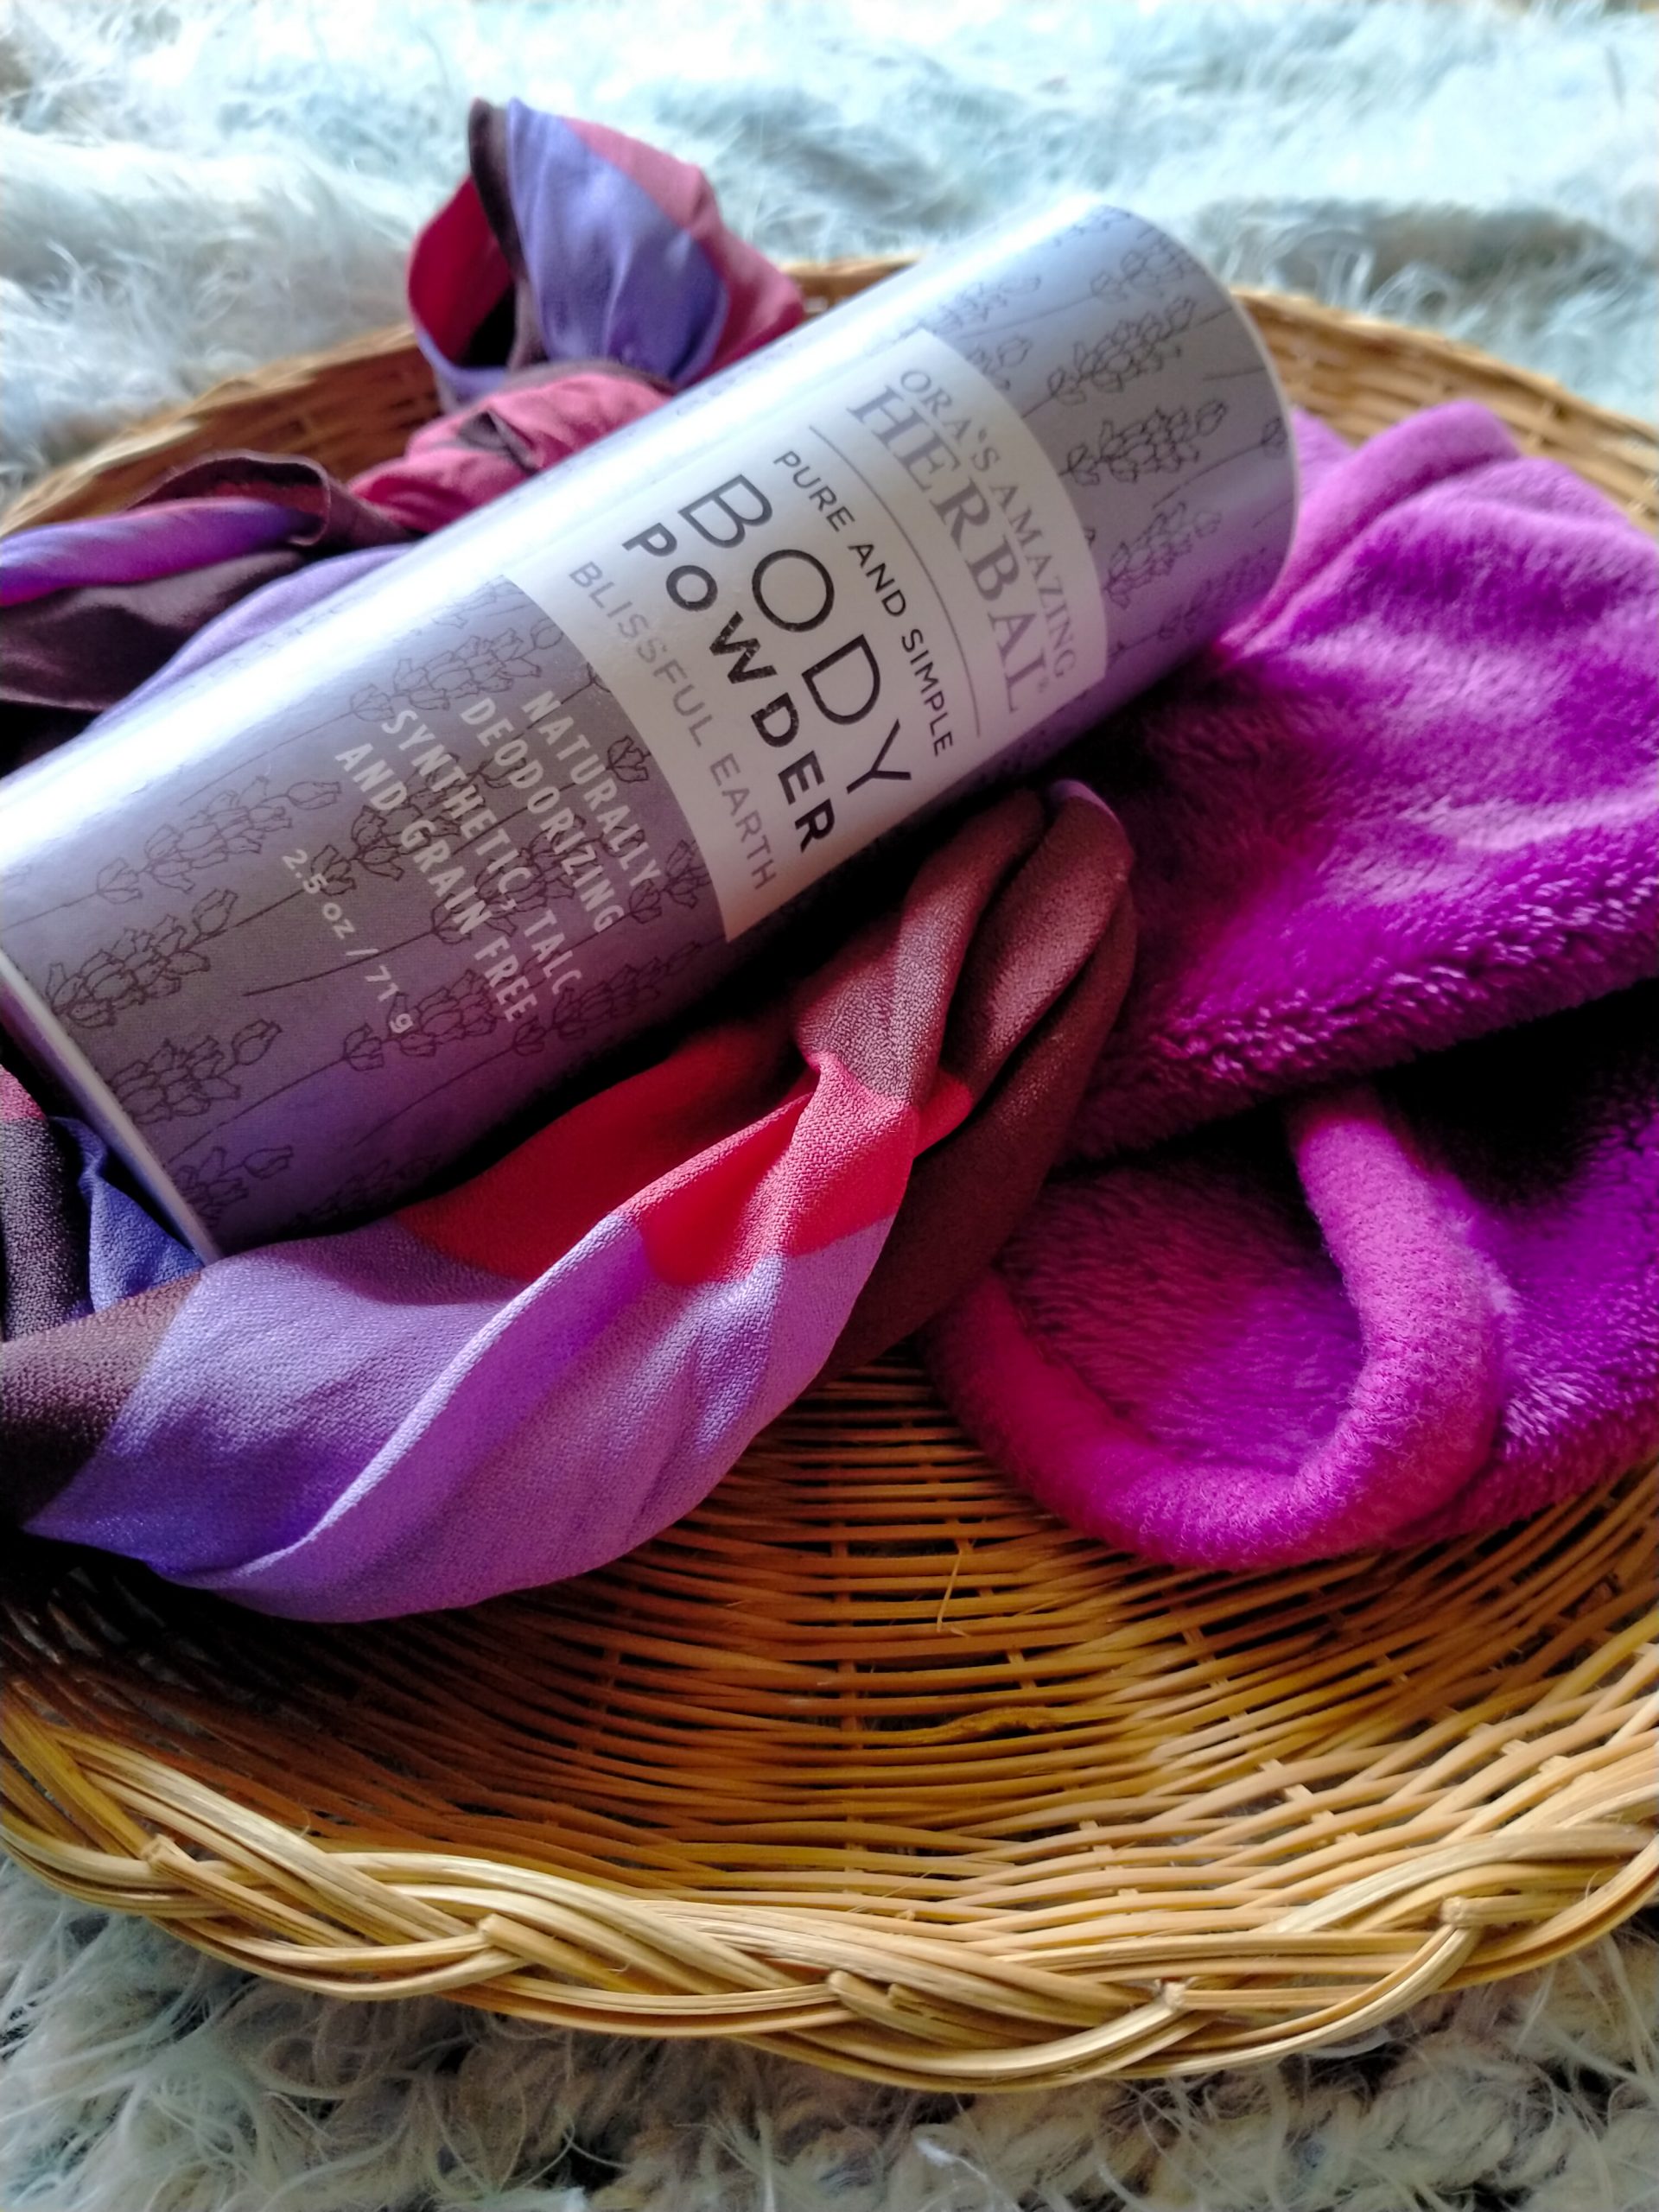 How To Use Body Powder- Ora’s Herbal Blissful Earth Body Powder Review